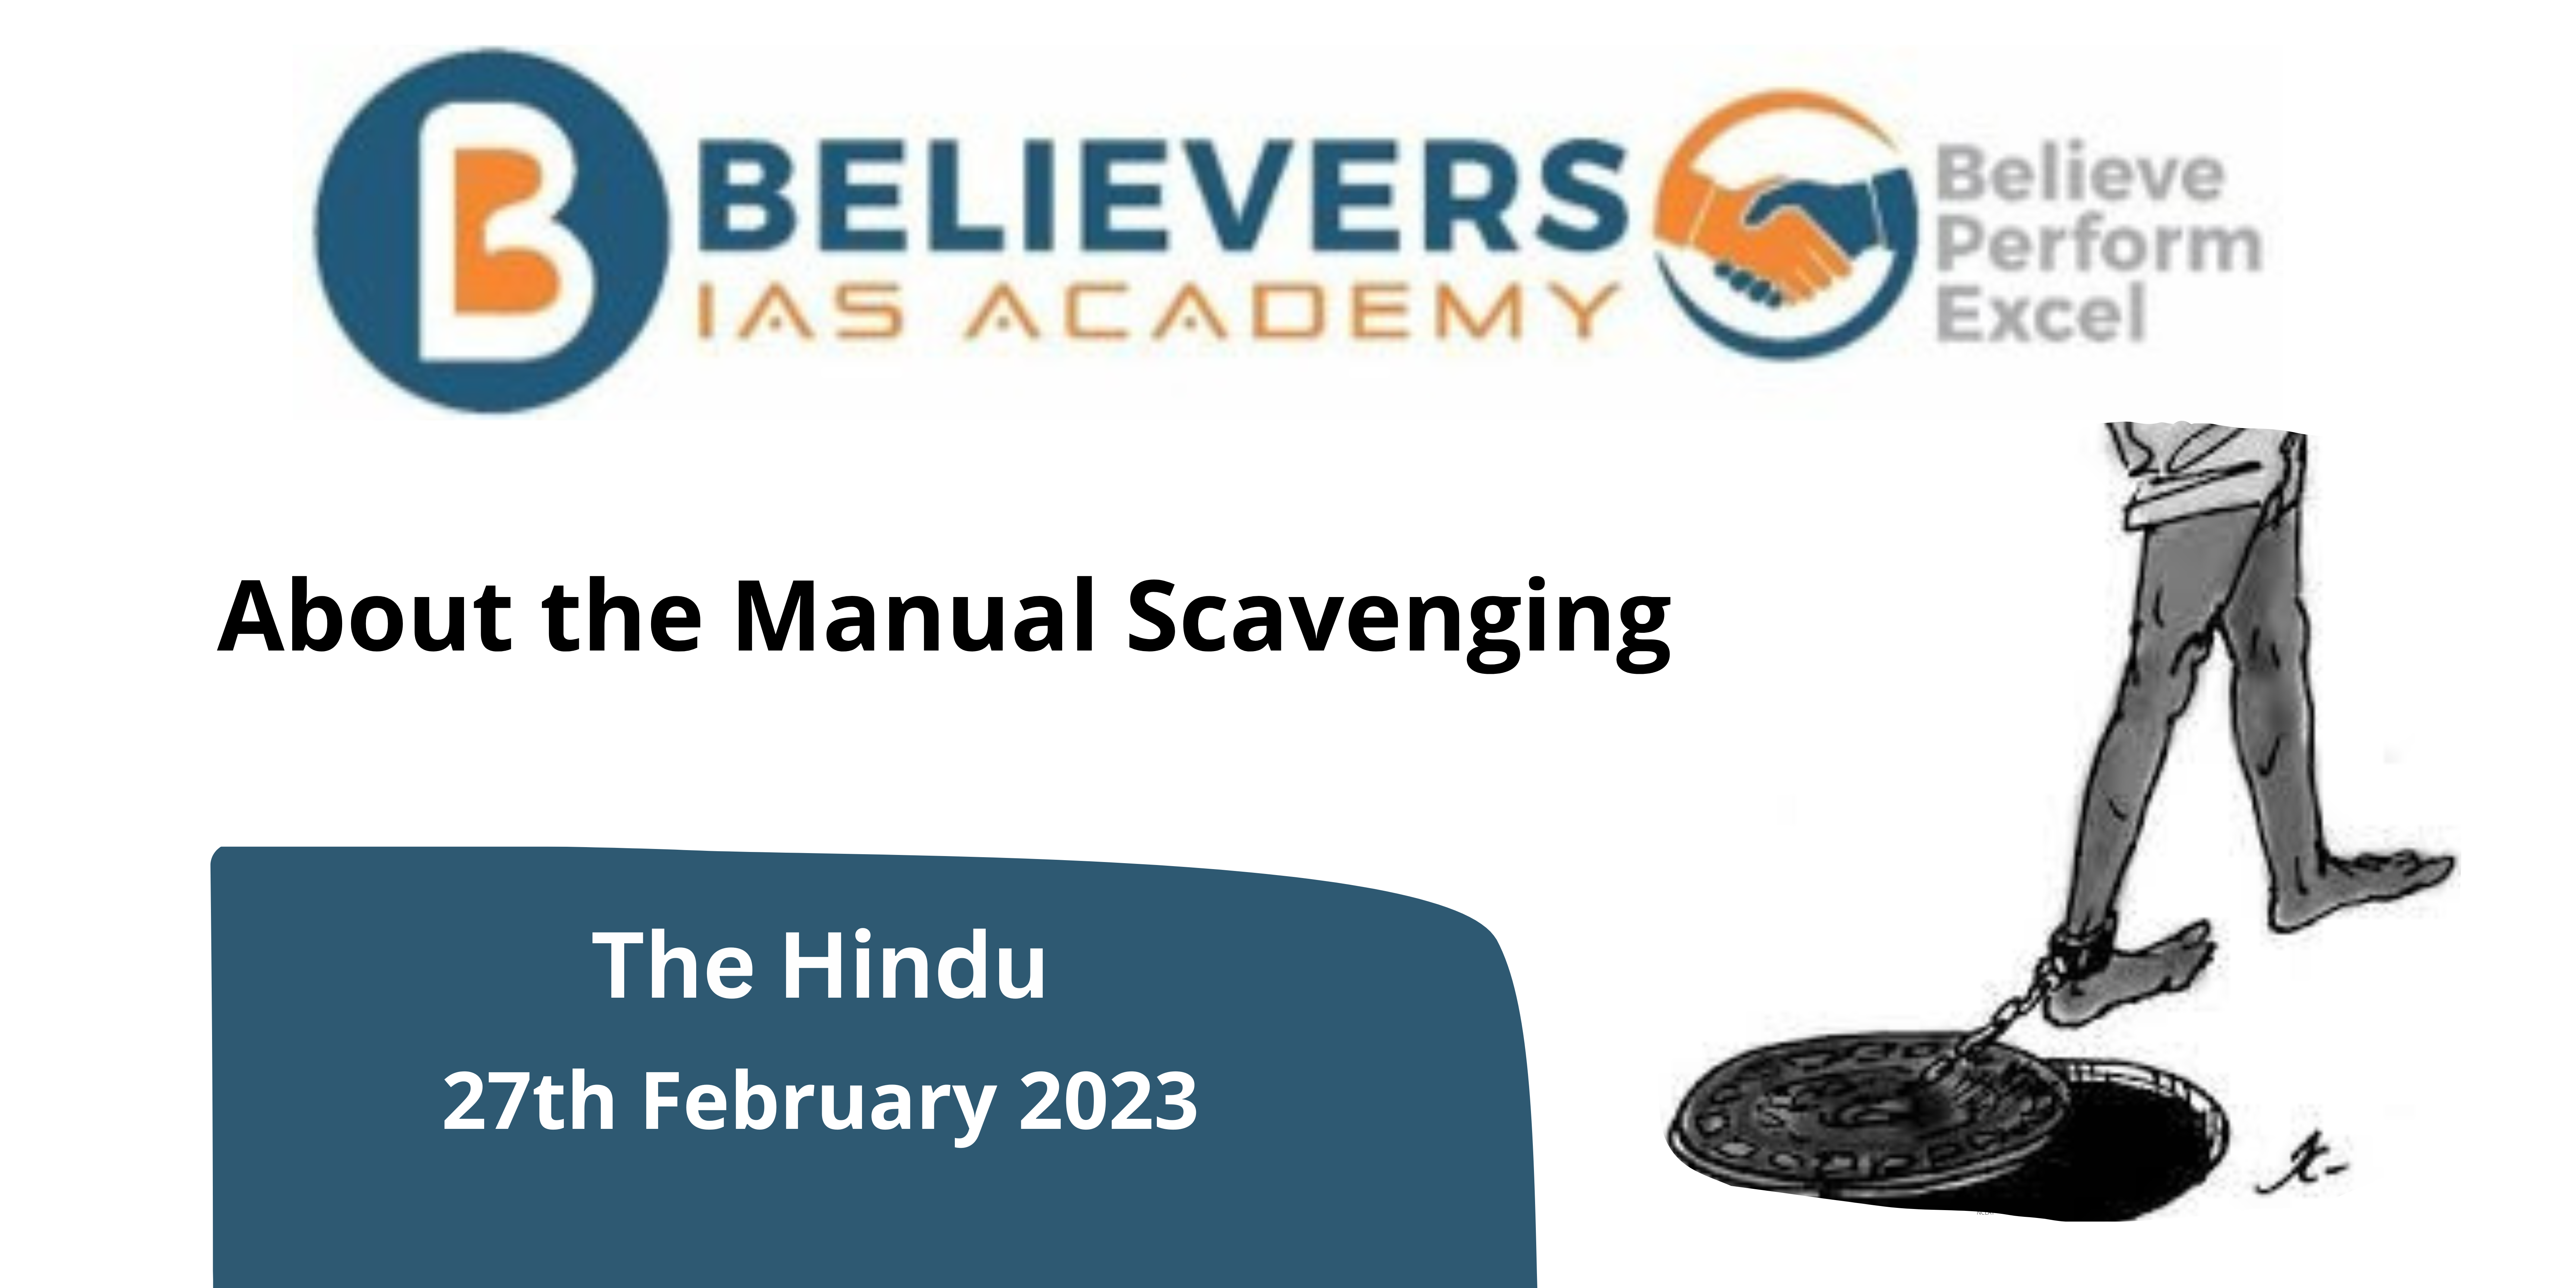 About the Manual Scavenging